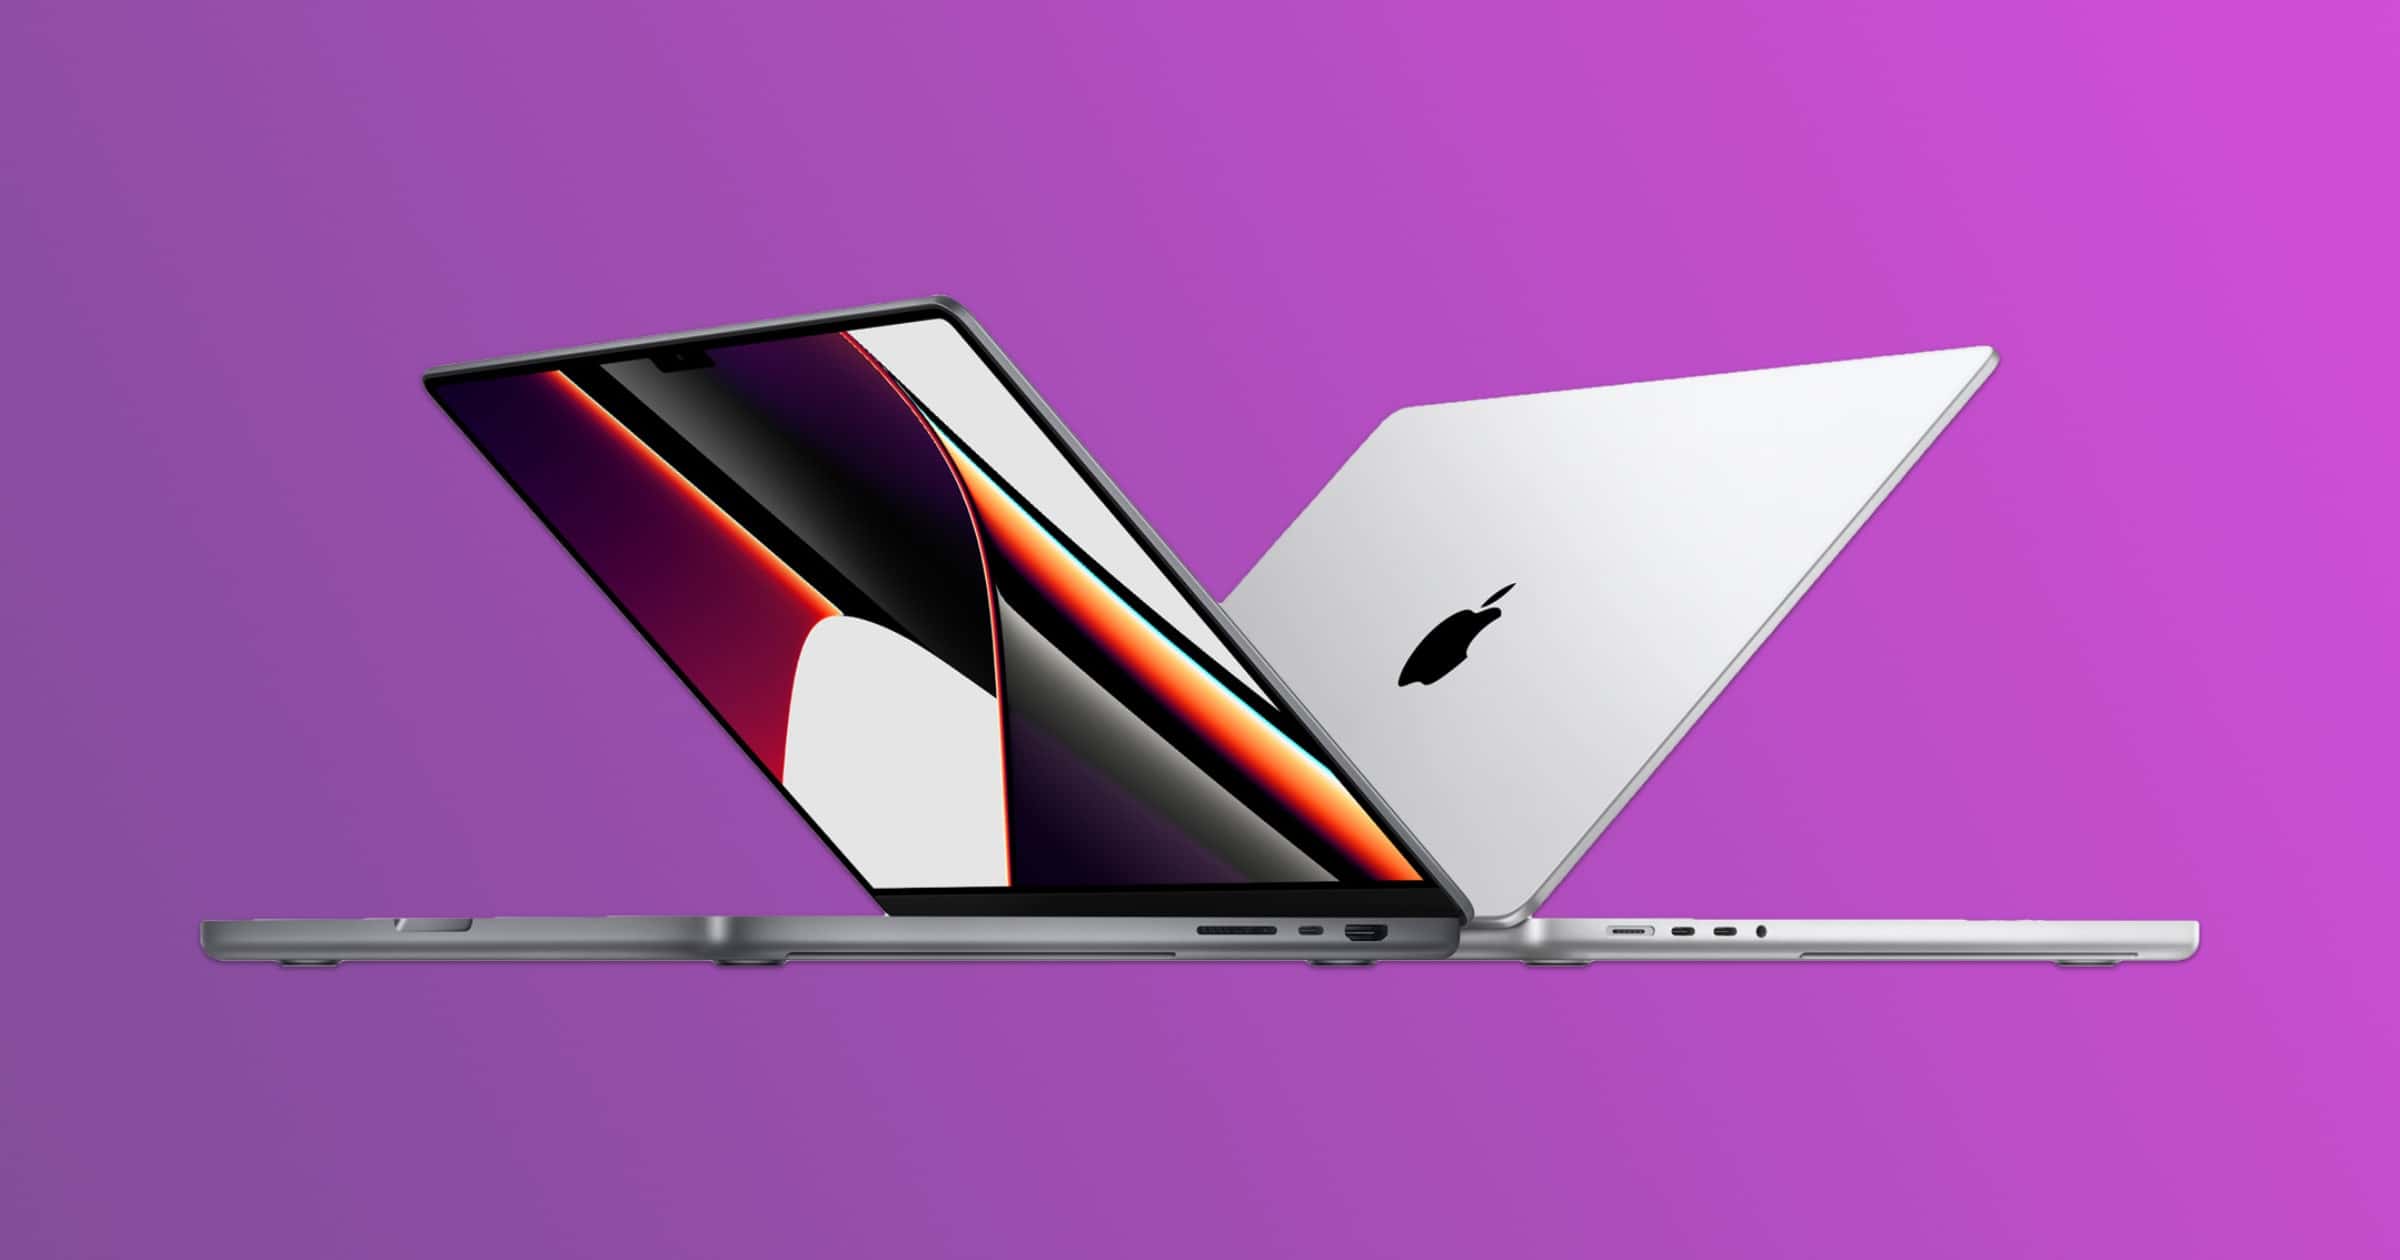 2021 MacBook Pro Features New Everything: Body, Display, Ports